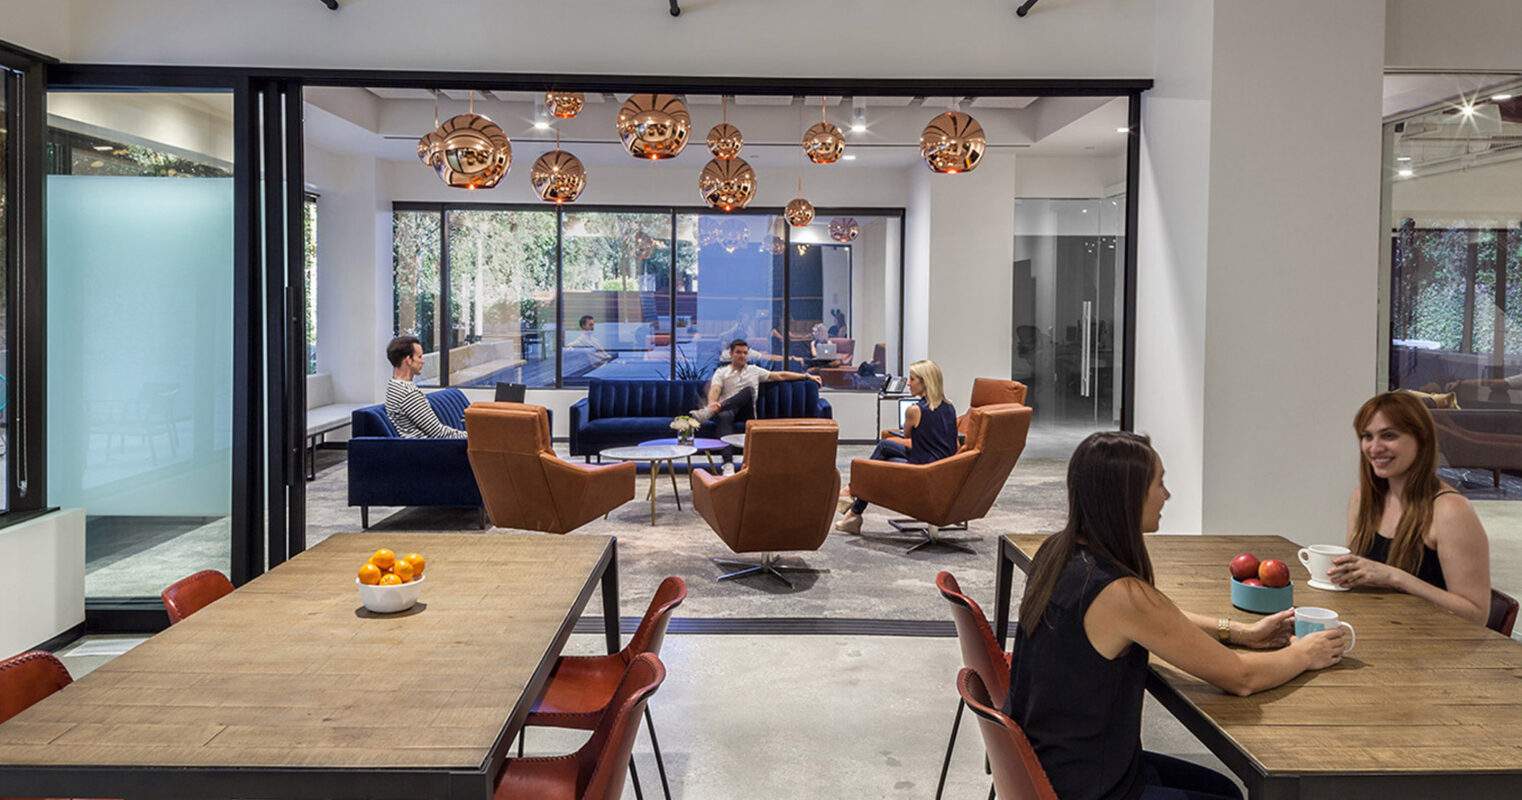 Open-plan office space featuring a harmonious blend of industrial and modern design elements, with polished concrete floors, exposed ductwork, and sleek black window frames. Accentuated by warm-toned copper pendant lighting and rich, upholstered furniture, fostering a collaborative atmosphere.